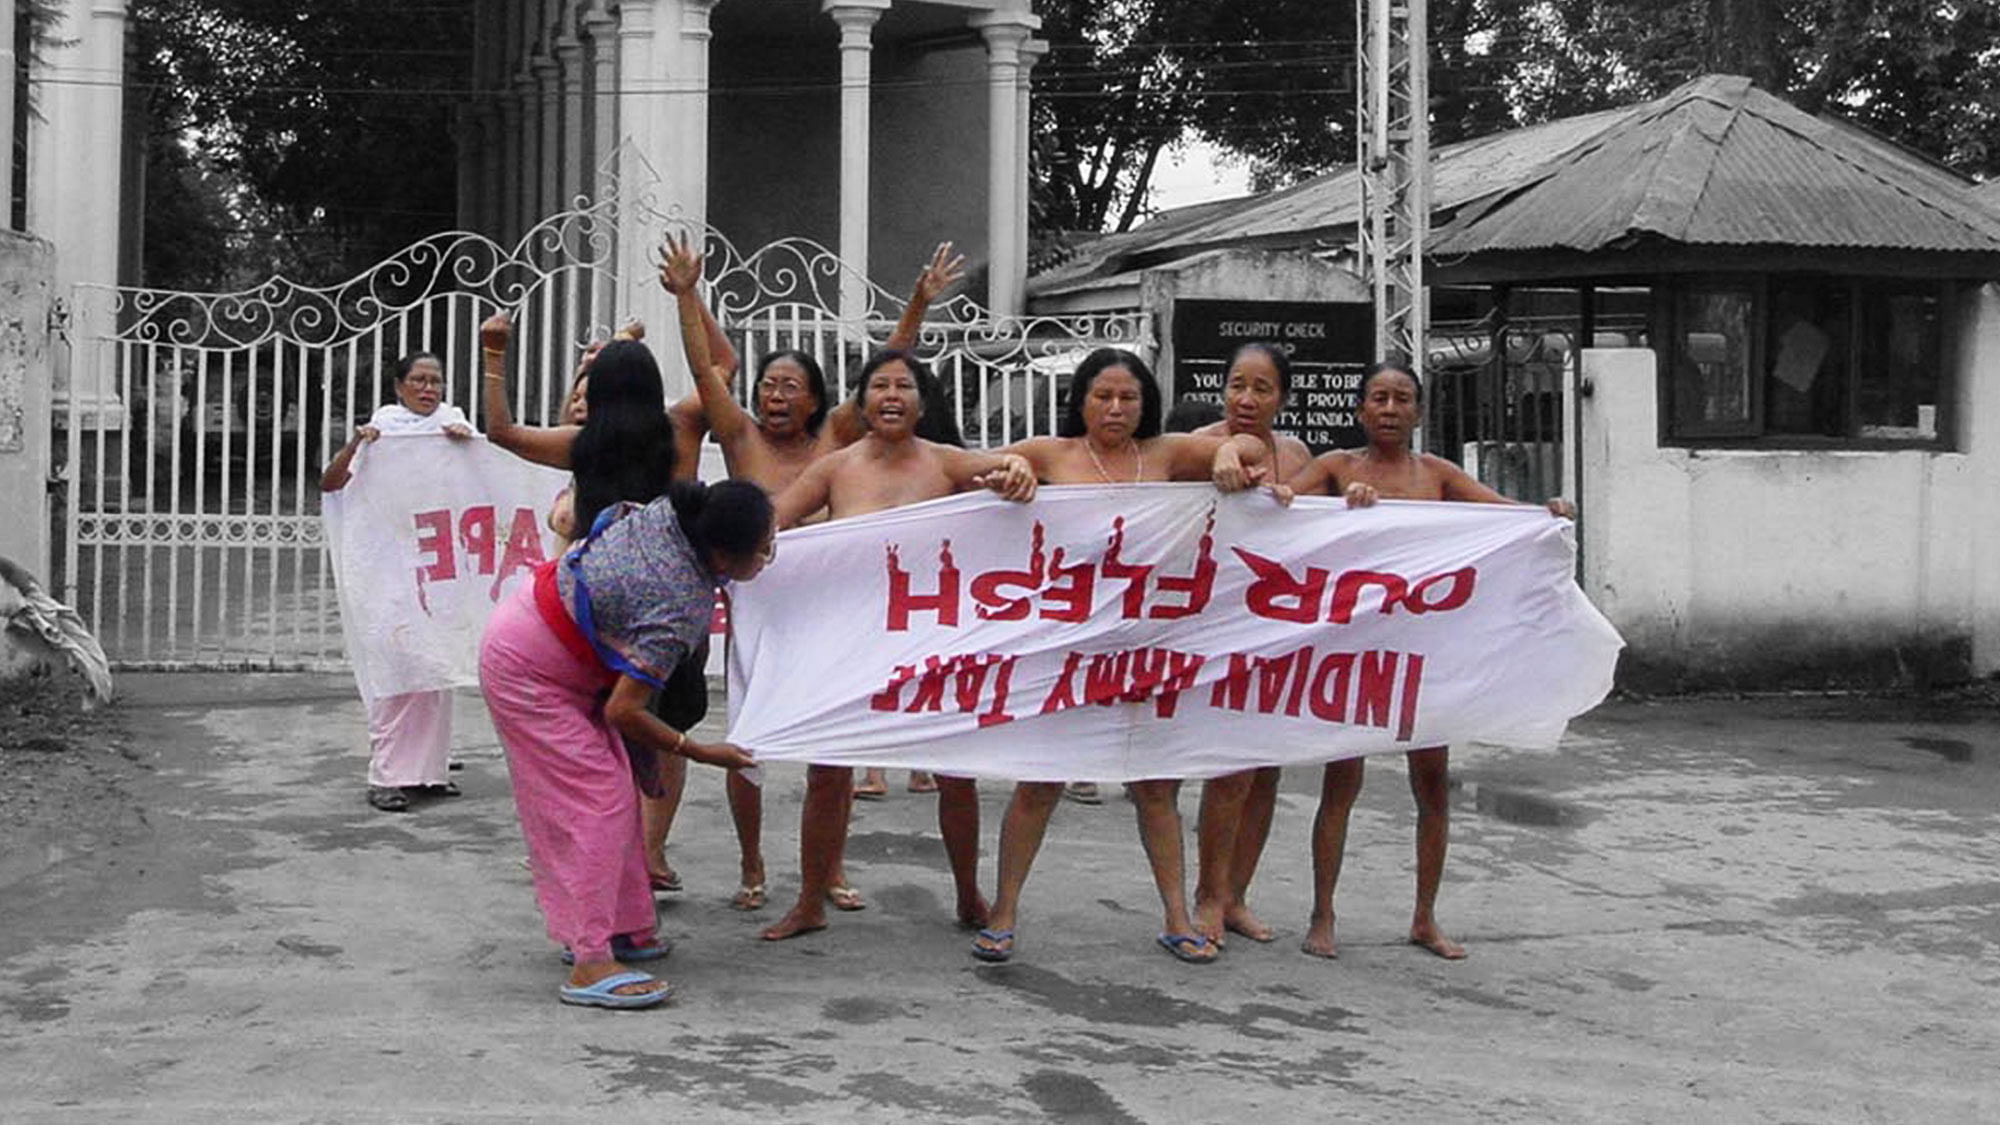 The protest by the Imas (mothers) of Manipur  after Manorama’s death. (Photo Courtesy: Sunzu Bachaspatimayum)